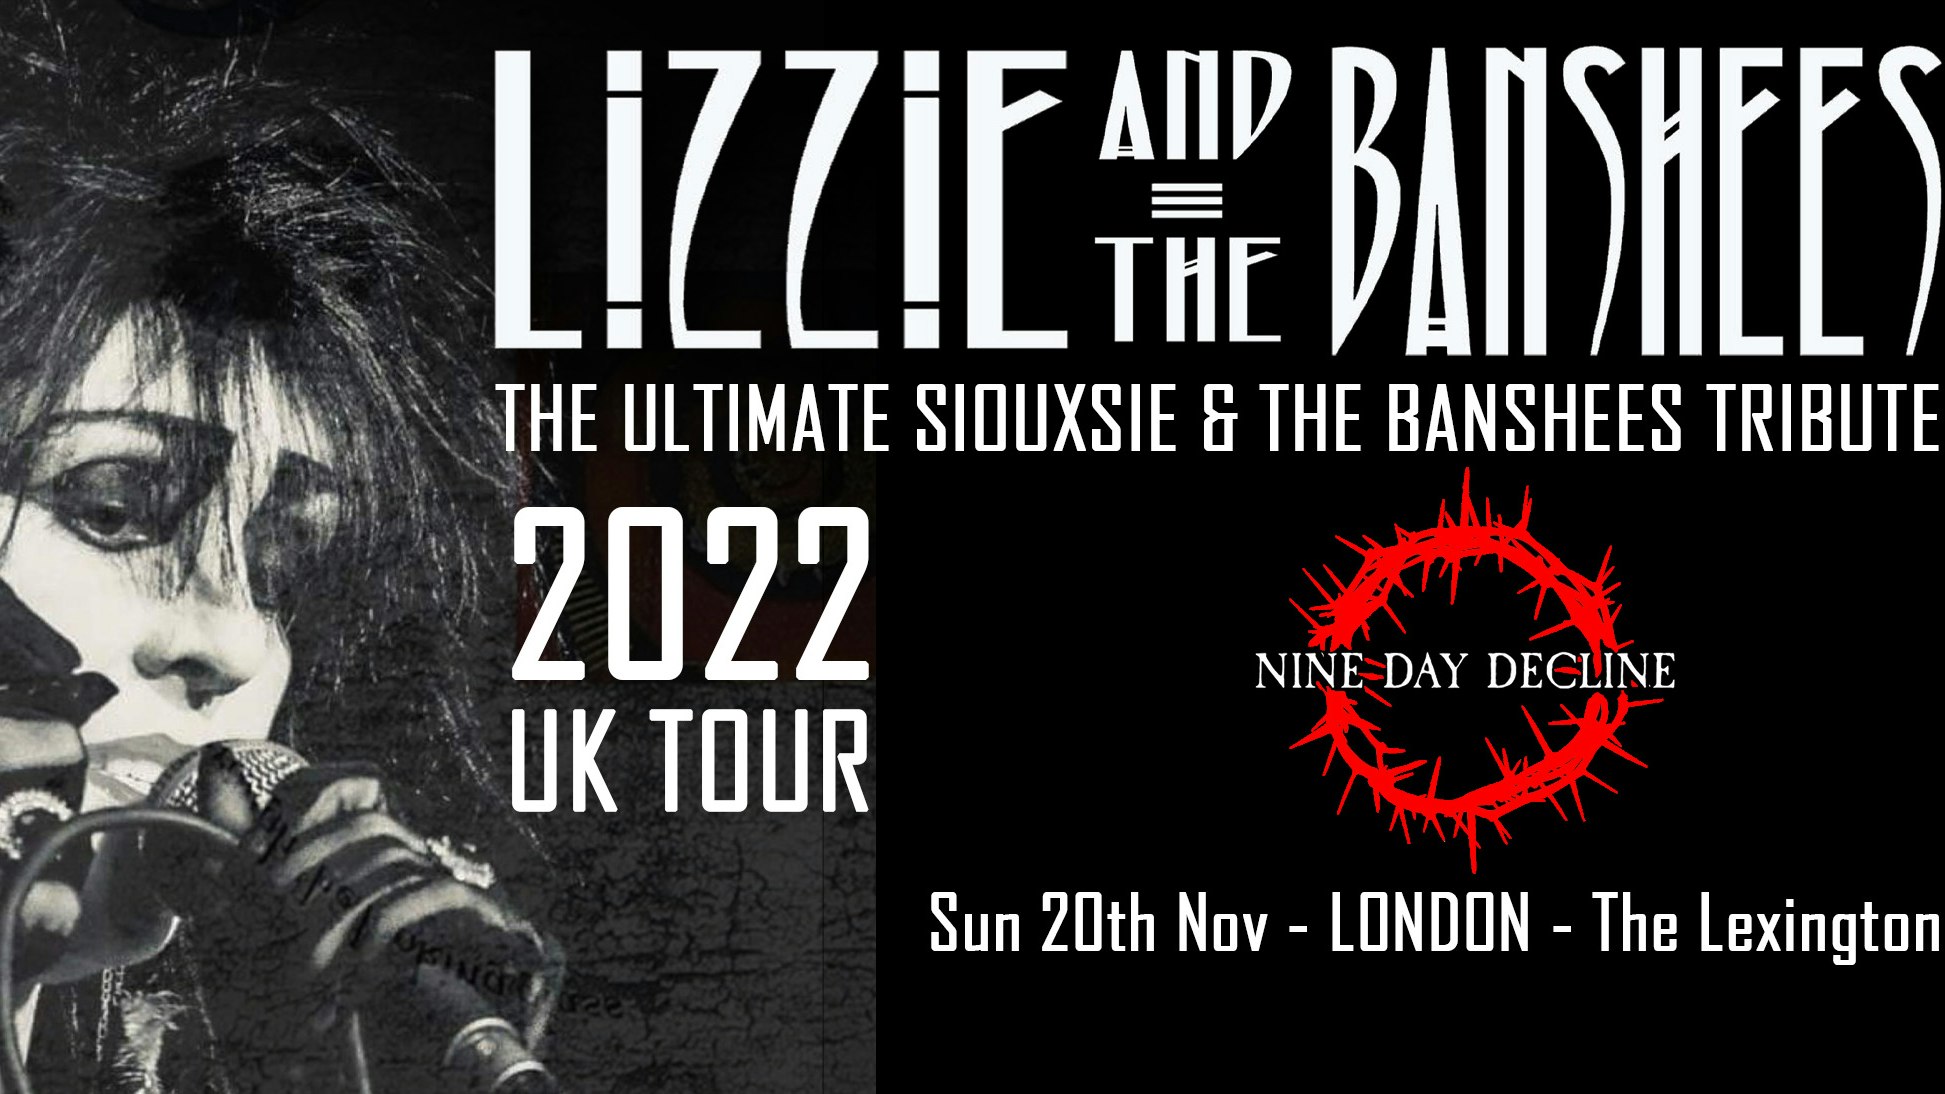 LIZZIE & THE BANSHEES – The Ultimate Siouxsie & The Banshees Tribute + Nine Day Decline